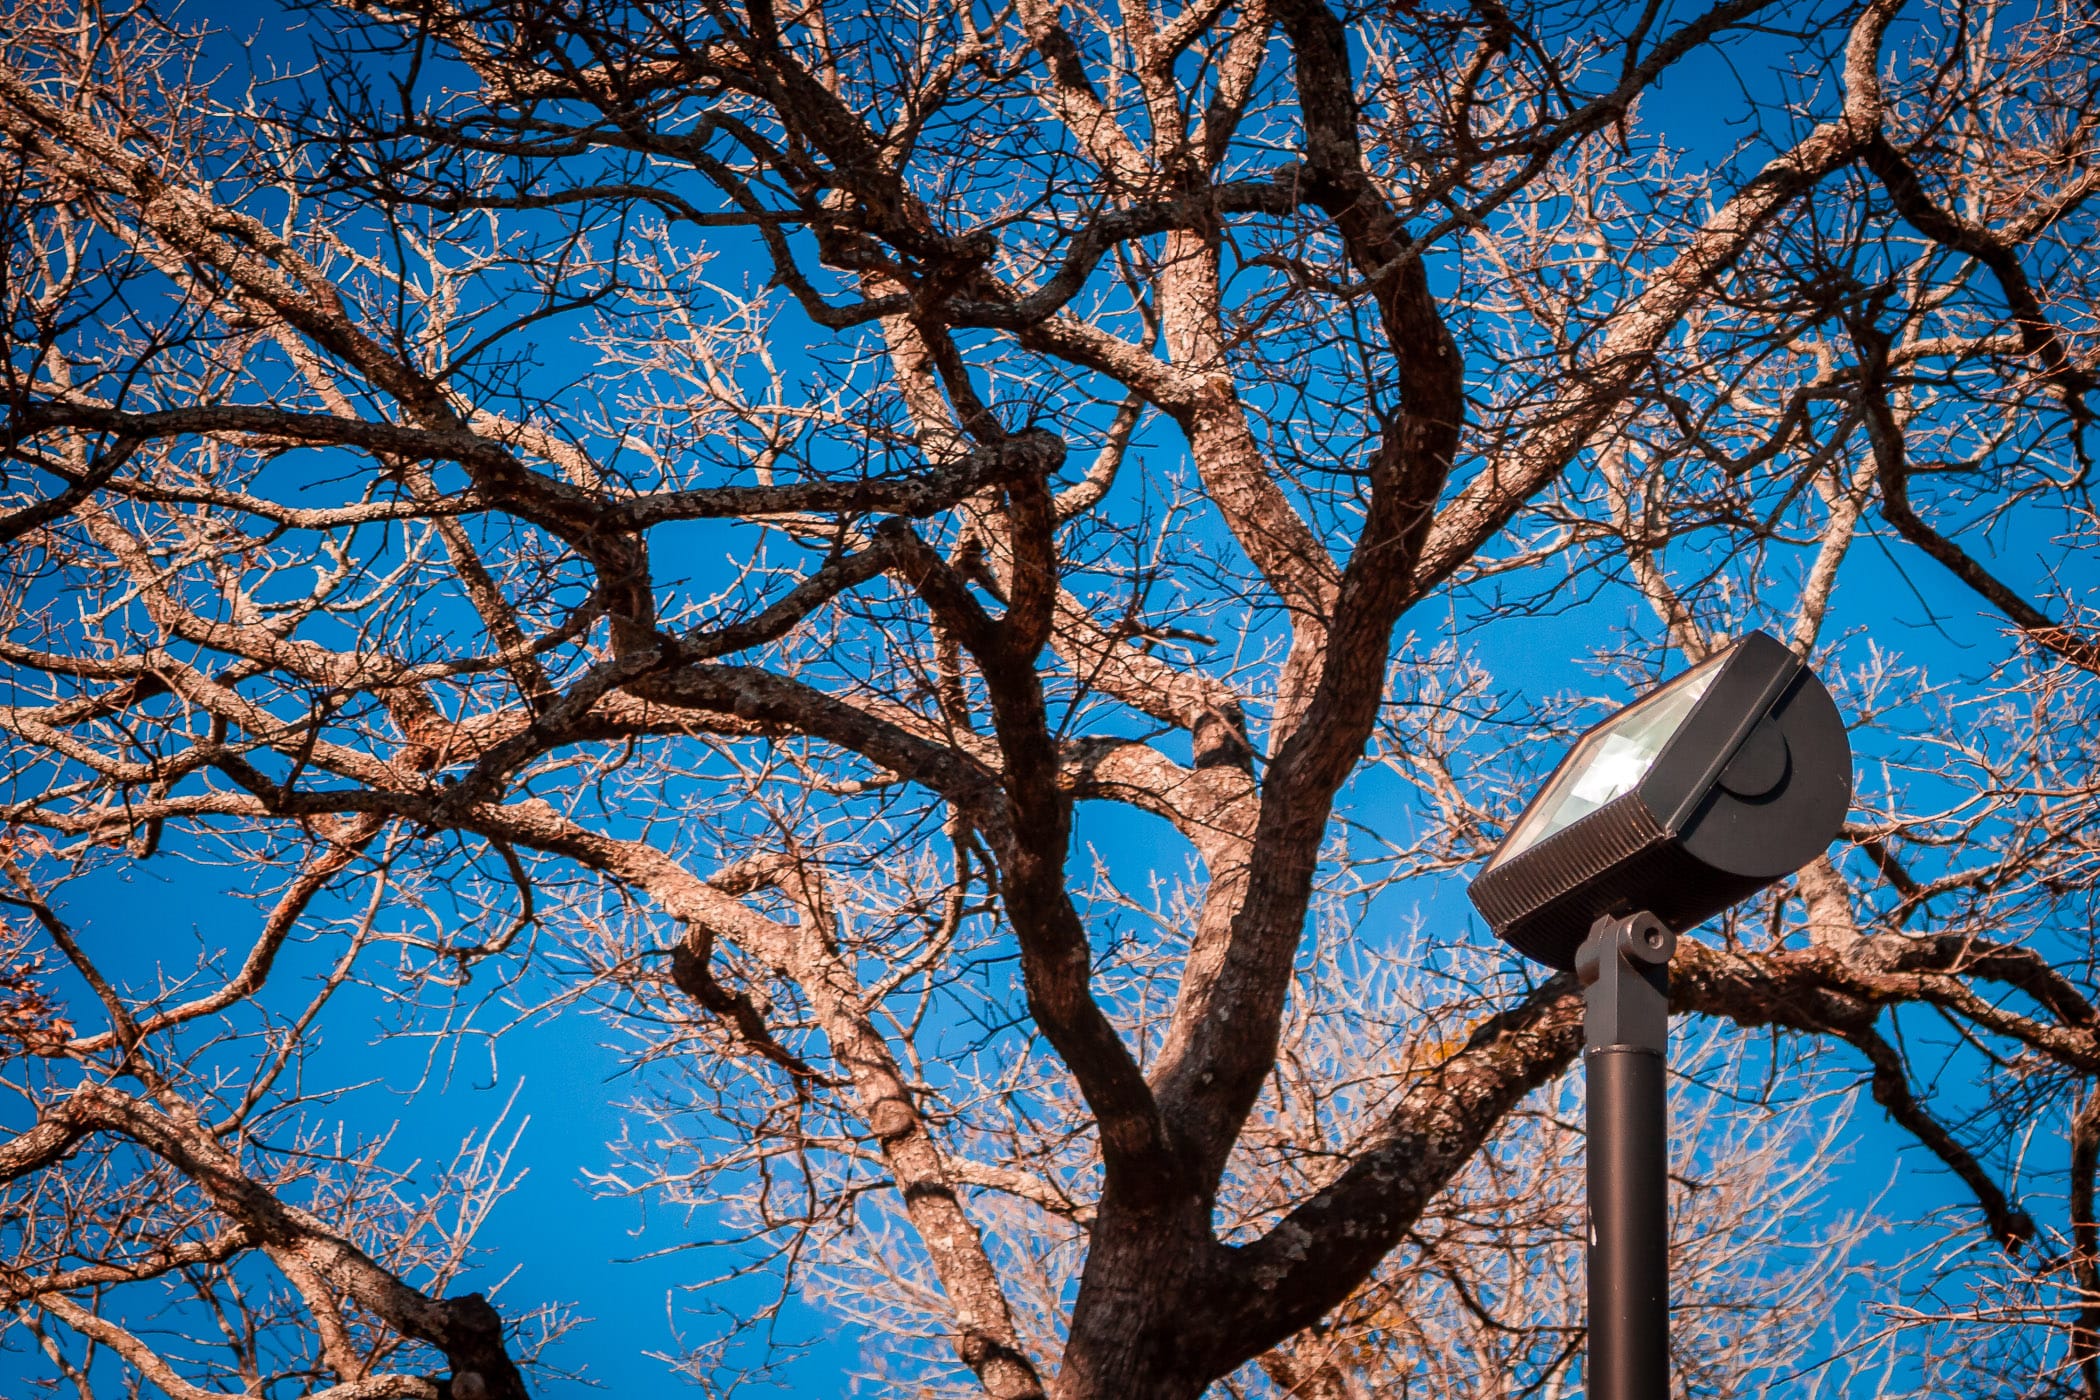 A light pole rises into trees on the campus of the University of Texas at Tyler.